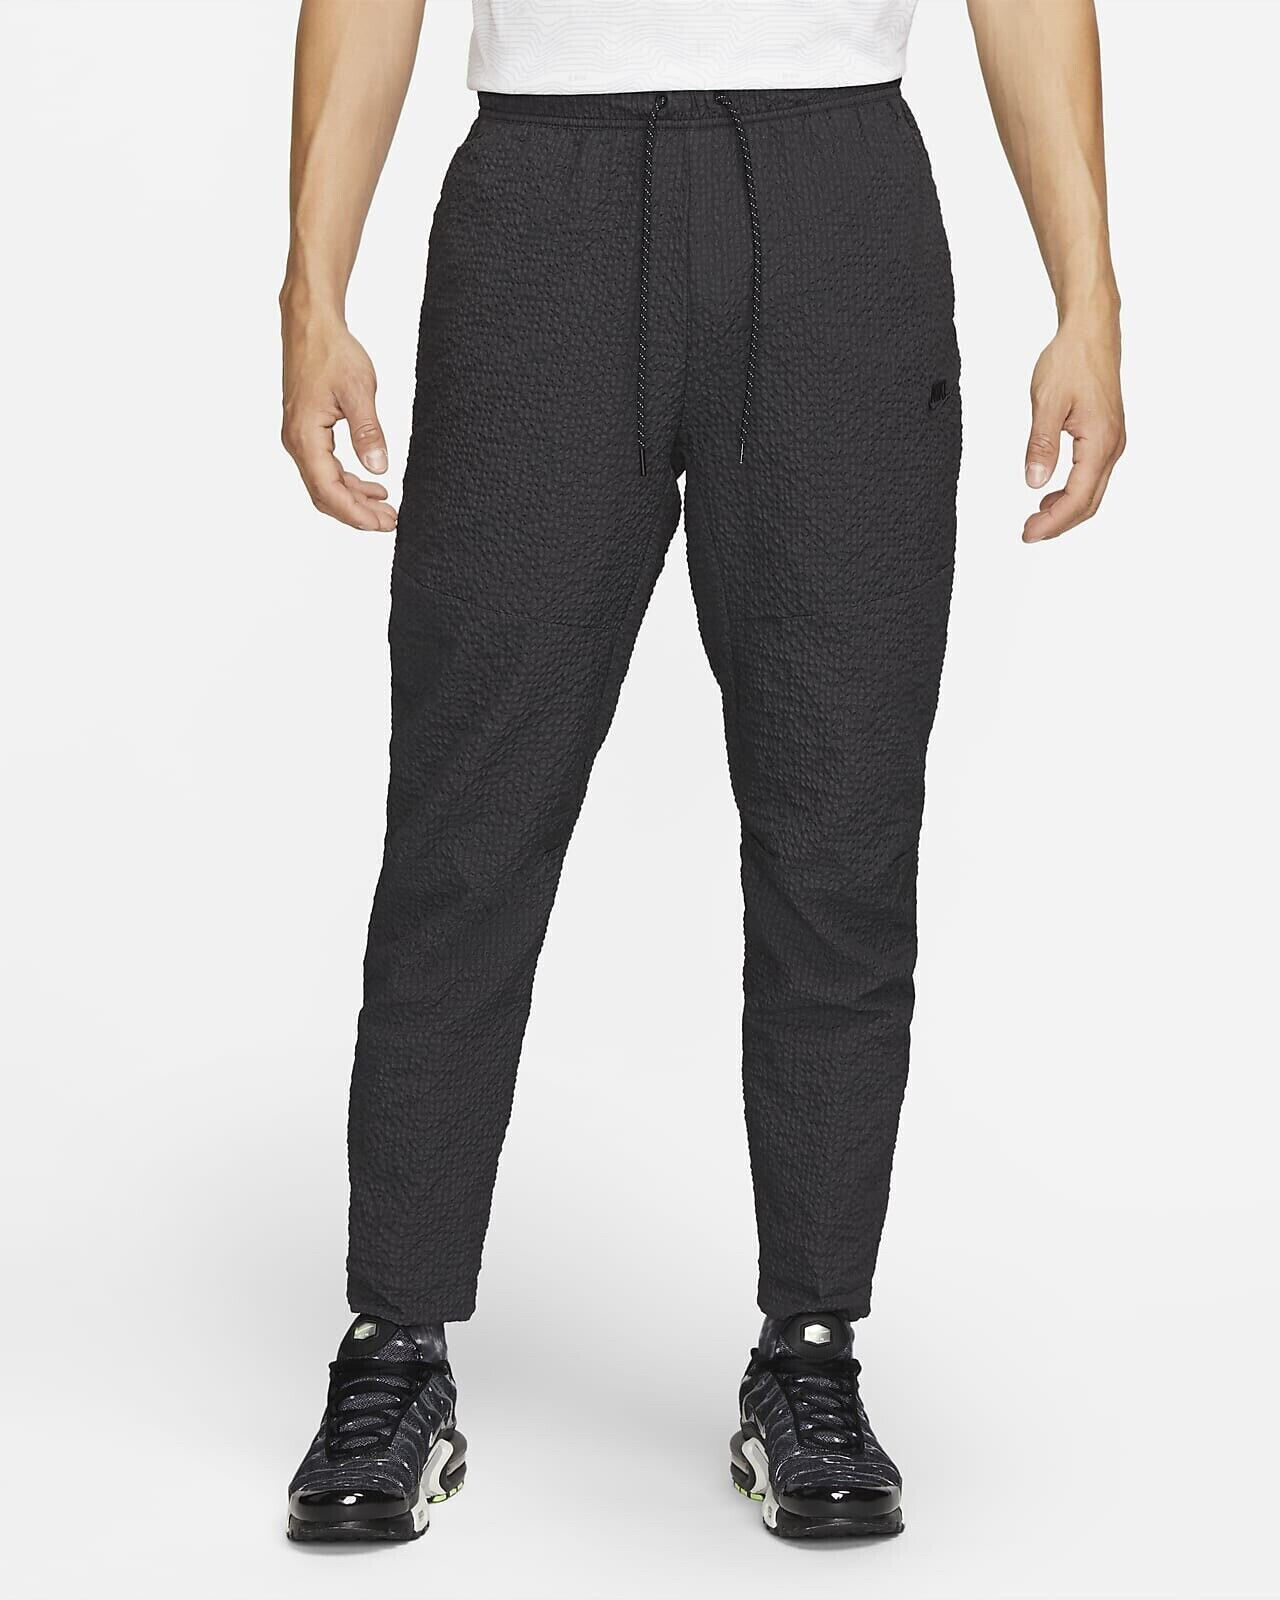 Nike Sportswear Tech Pack Pants Size S Essentials Woven Joggers DQ4324 010  New